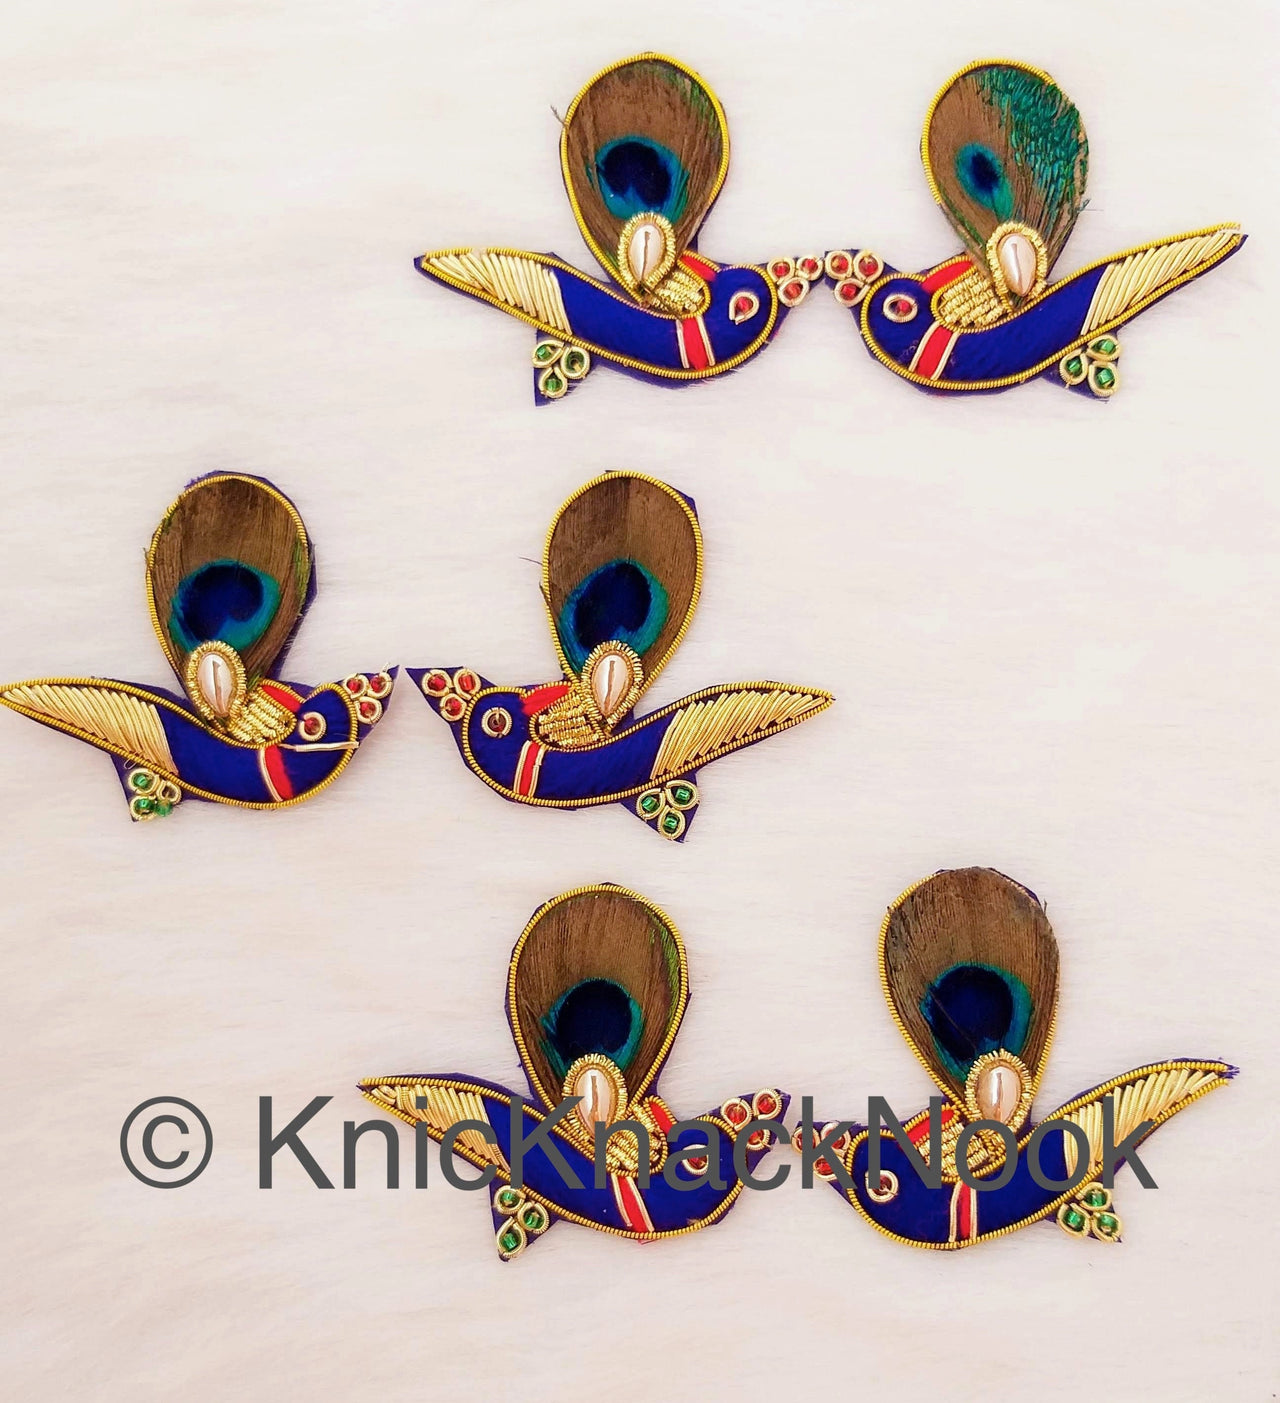 Hand Embroidered Peacock Applique In Blue, Red and Gold Embroidery With Peacock Feather And Gold Bead, Zardozi Work